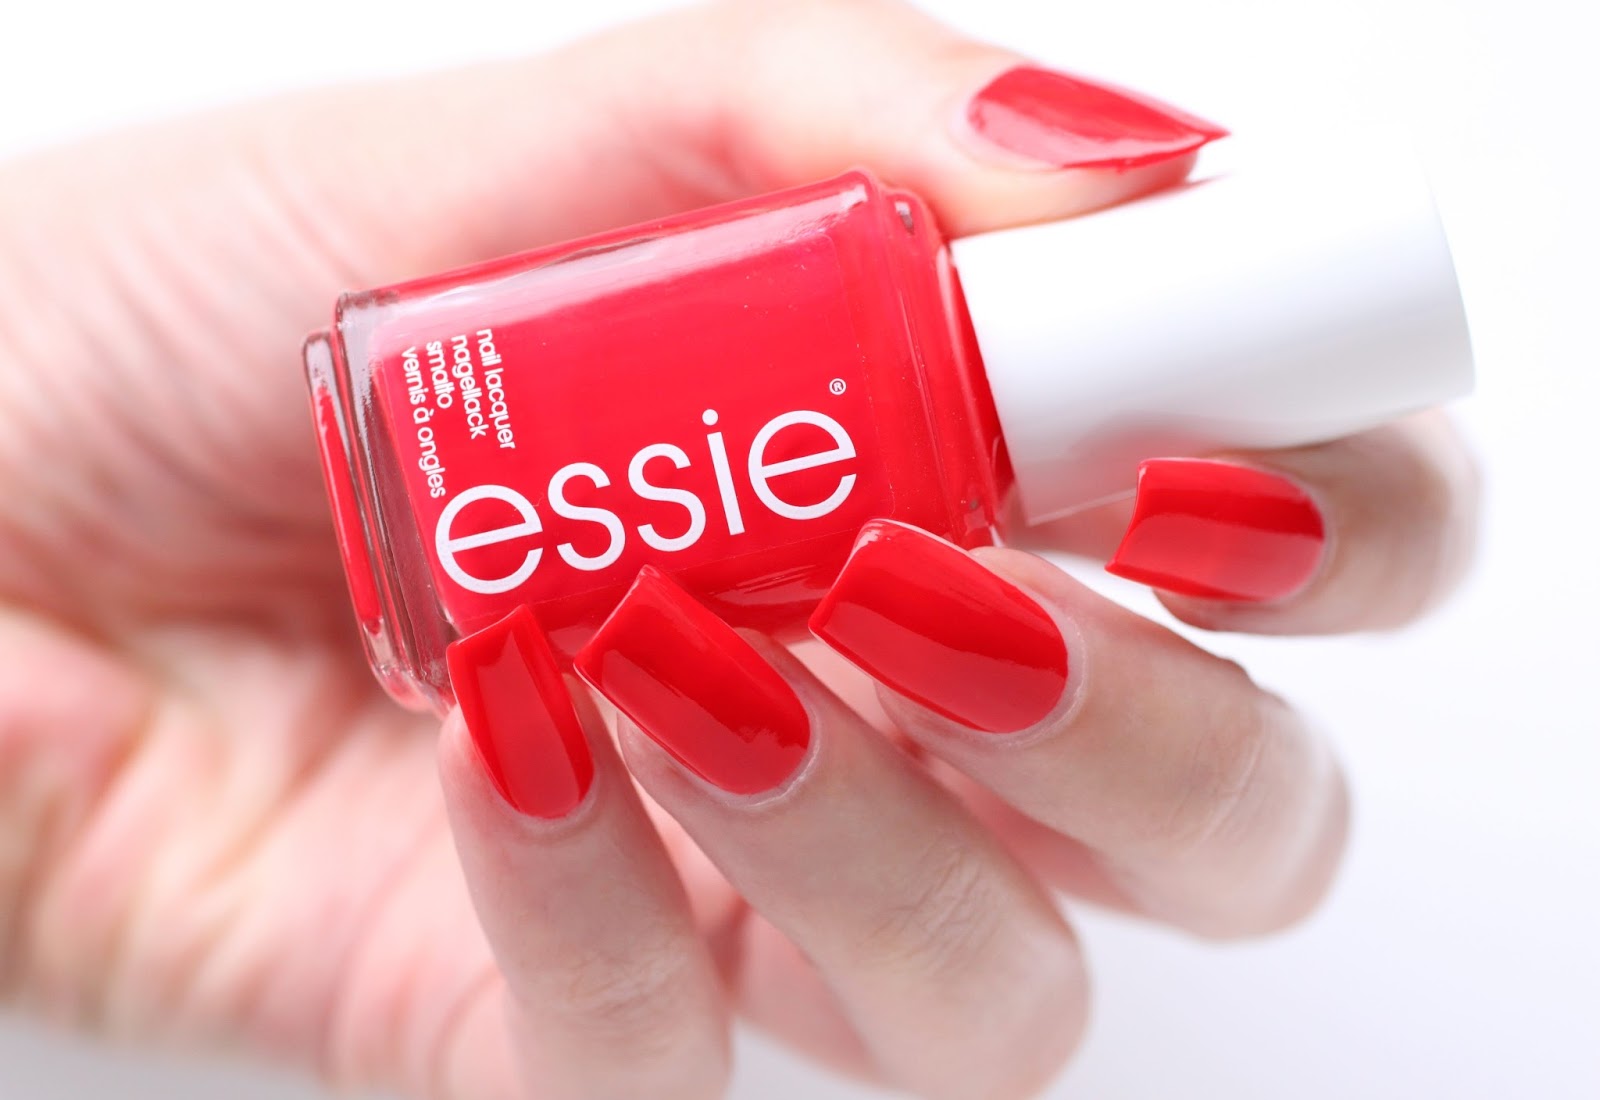 Essie Nail Polish Colors: The Complete List - wide 6